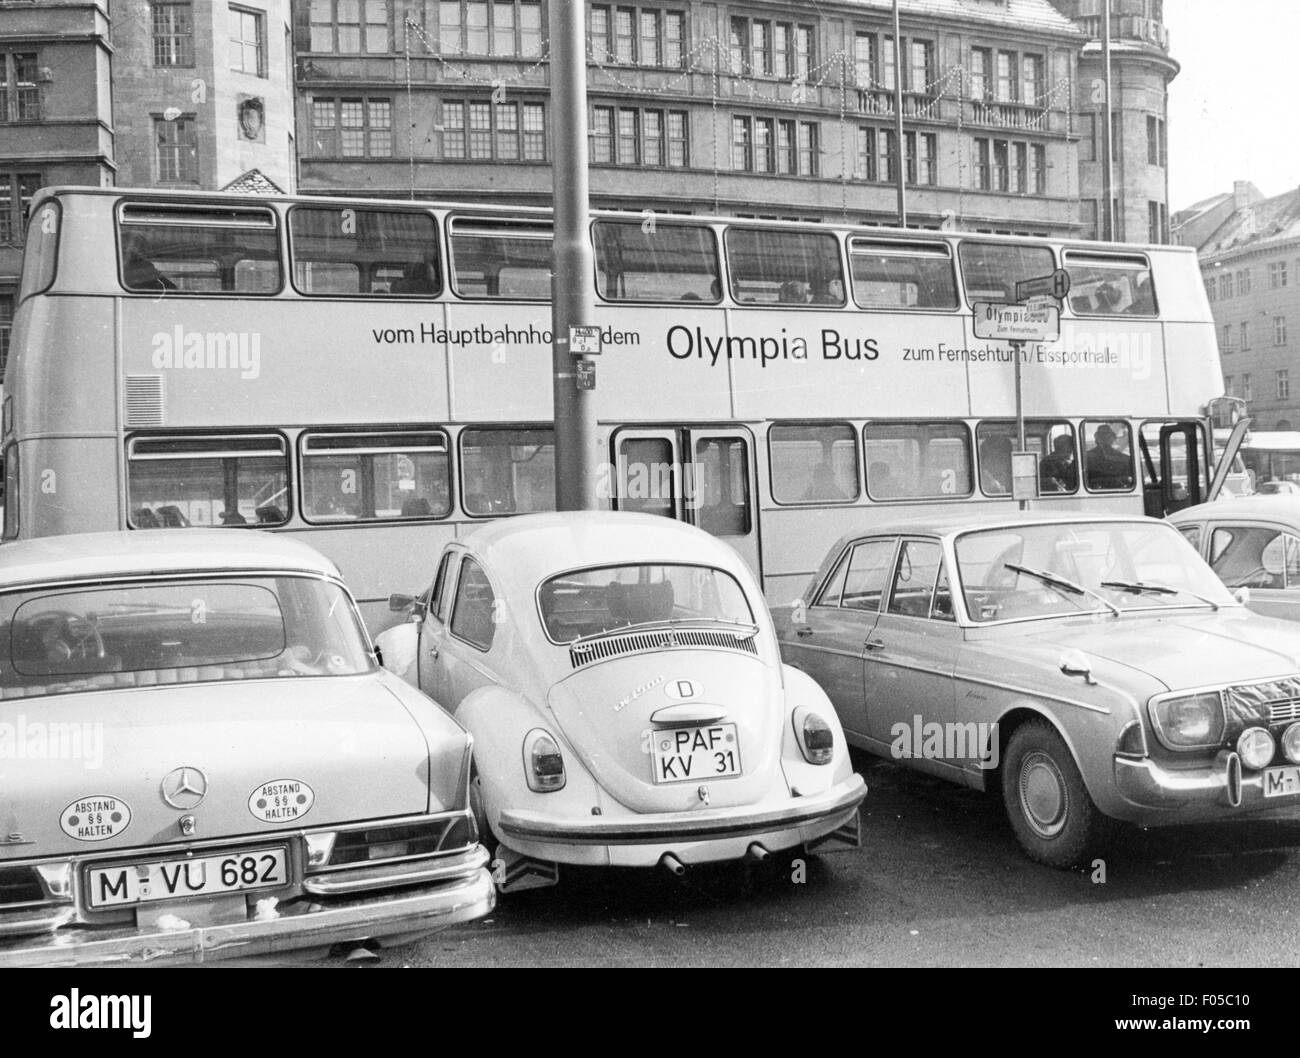 geography / travel,Germany,Munich,transport / transportation,public local traffic,Olympia Bus,direct connection from the Central Station to the Olympic Area,stop at Bahnhofsplatz,1970,double decker,double-decker bus,double deckers,double-decker buses,double-decker busses,public local traffic,bus stop,bus stops,tourism,touristic,cars,car,Volkswagen,VW beetle 1500,Mercedes-Benz W 110,Mercedes Benz W110,people,Bavaria,West Germany,Western Germany,Germany,1970s,70s,20th century,transport,transportation,connection,connexion,conne,Additional-Rights-Clearences-Not Available Stock Photo